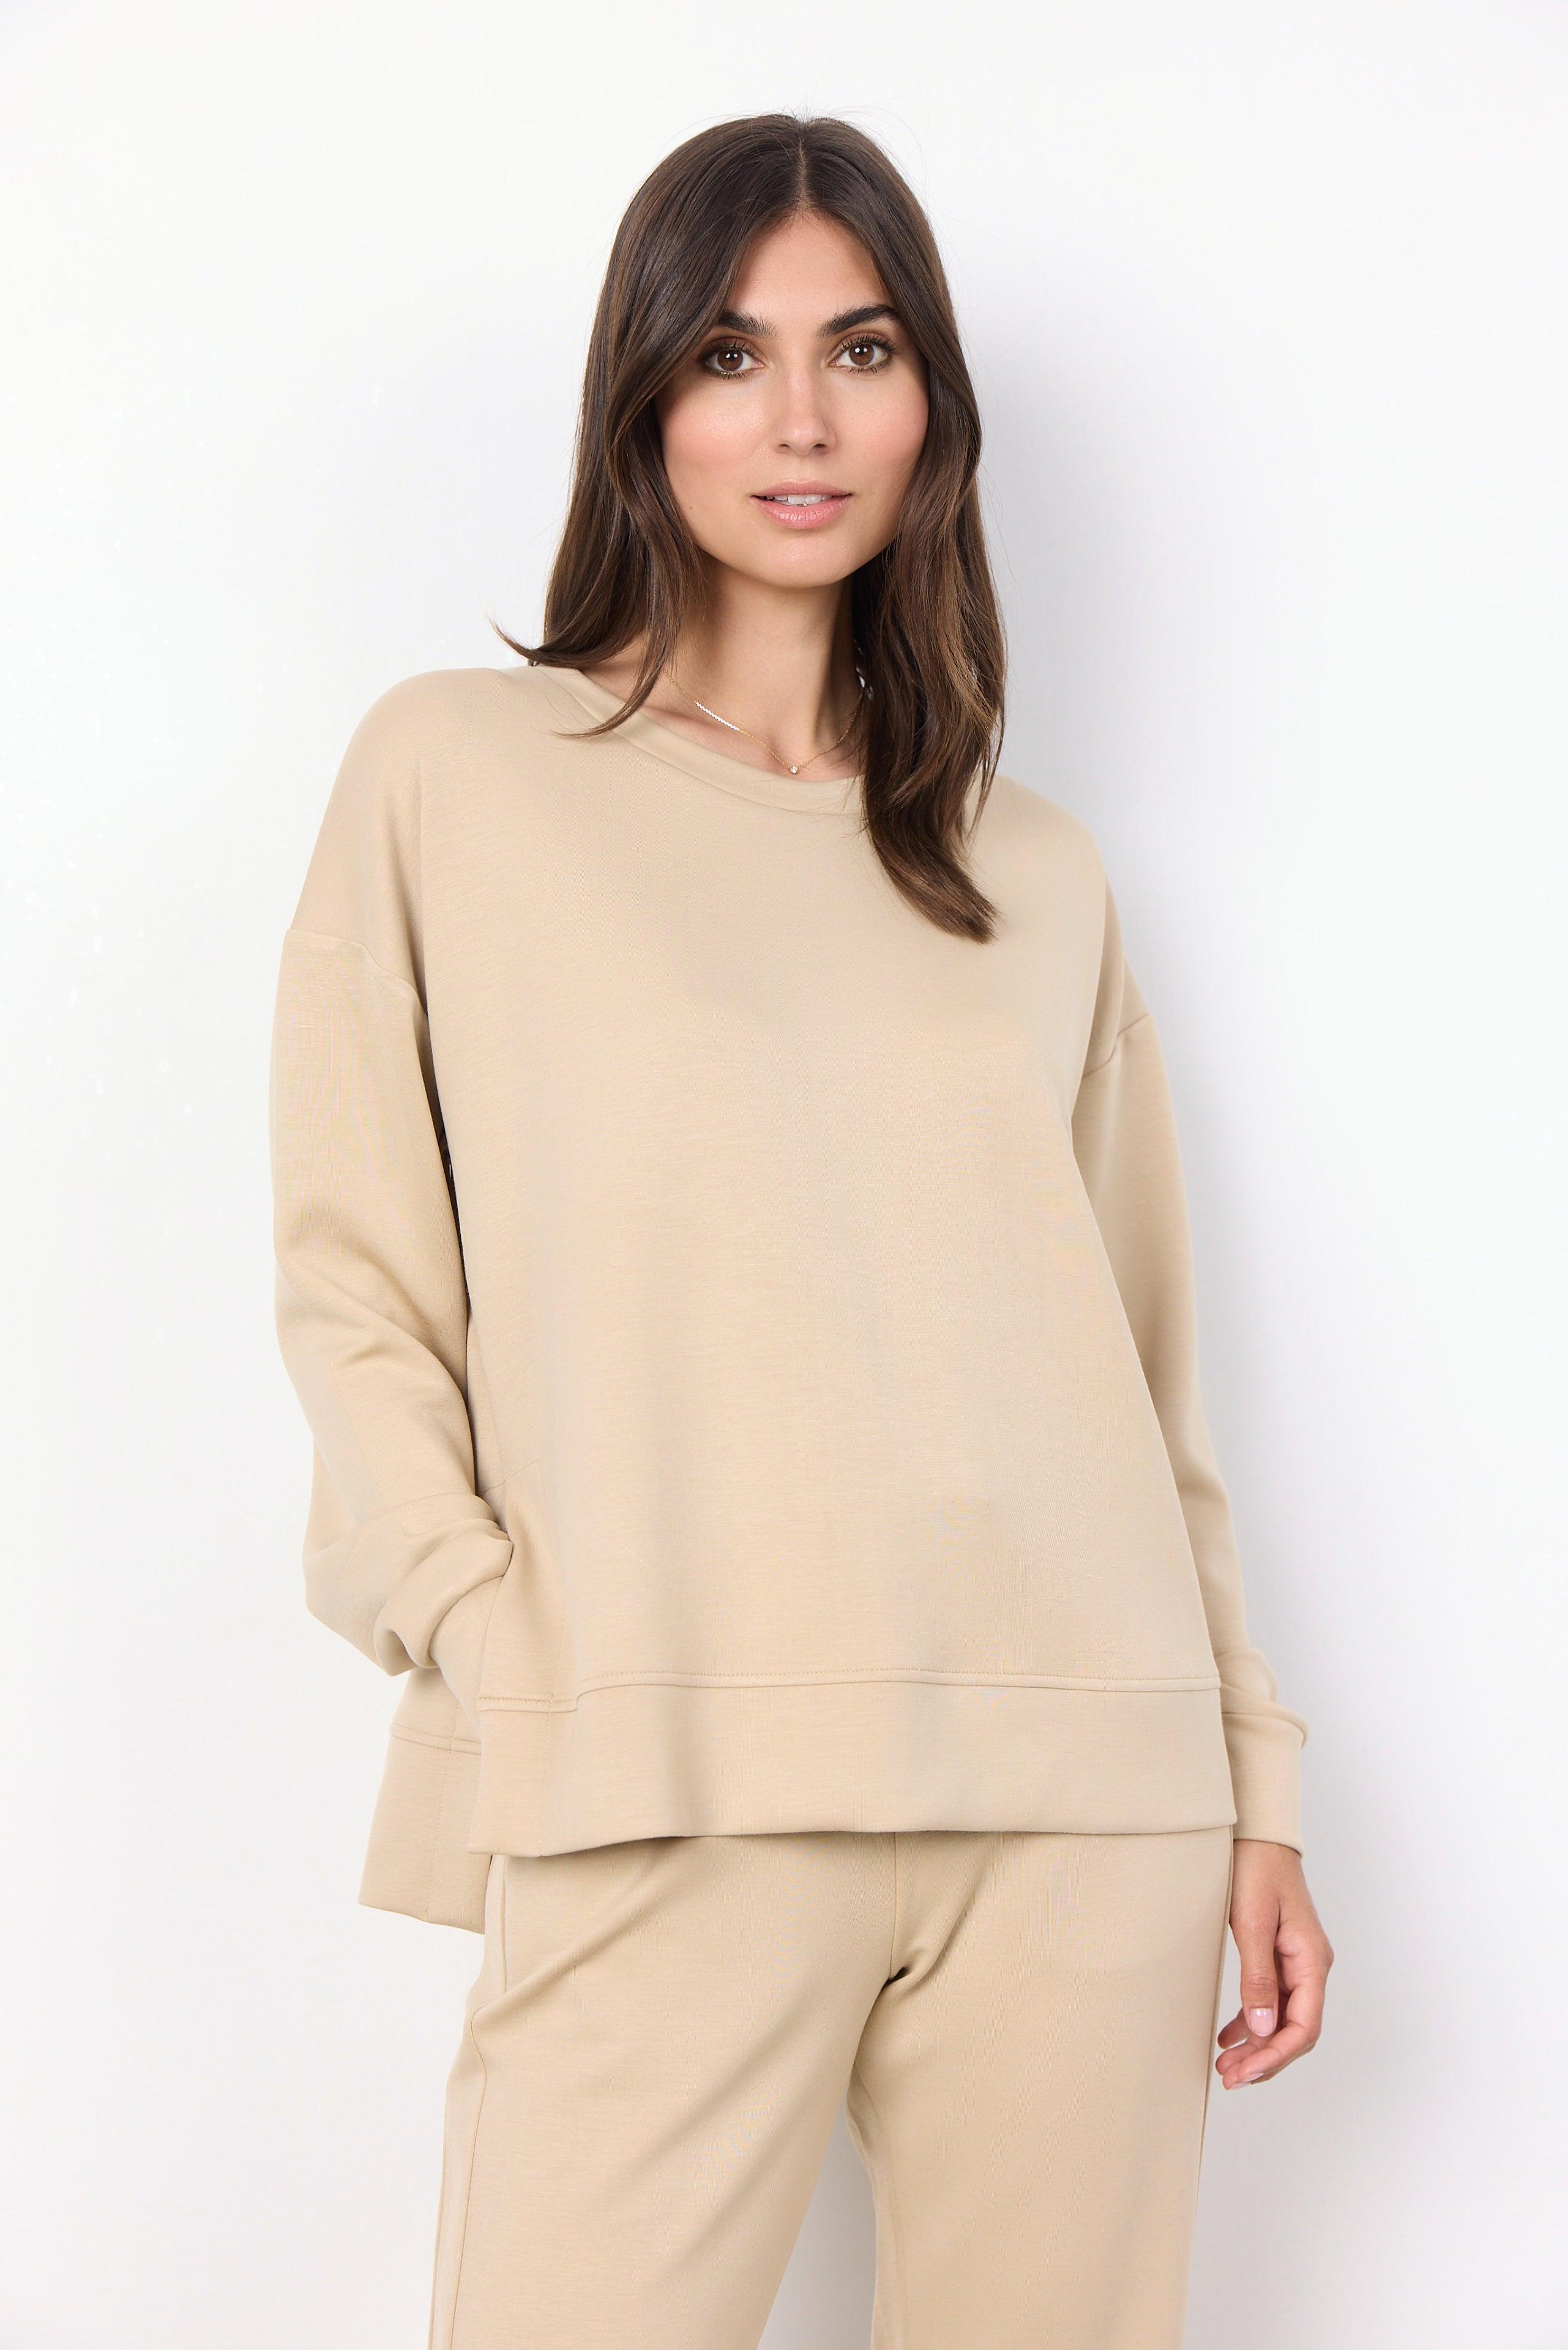 Allie Pullover - Fox Trot Boutique